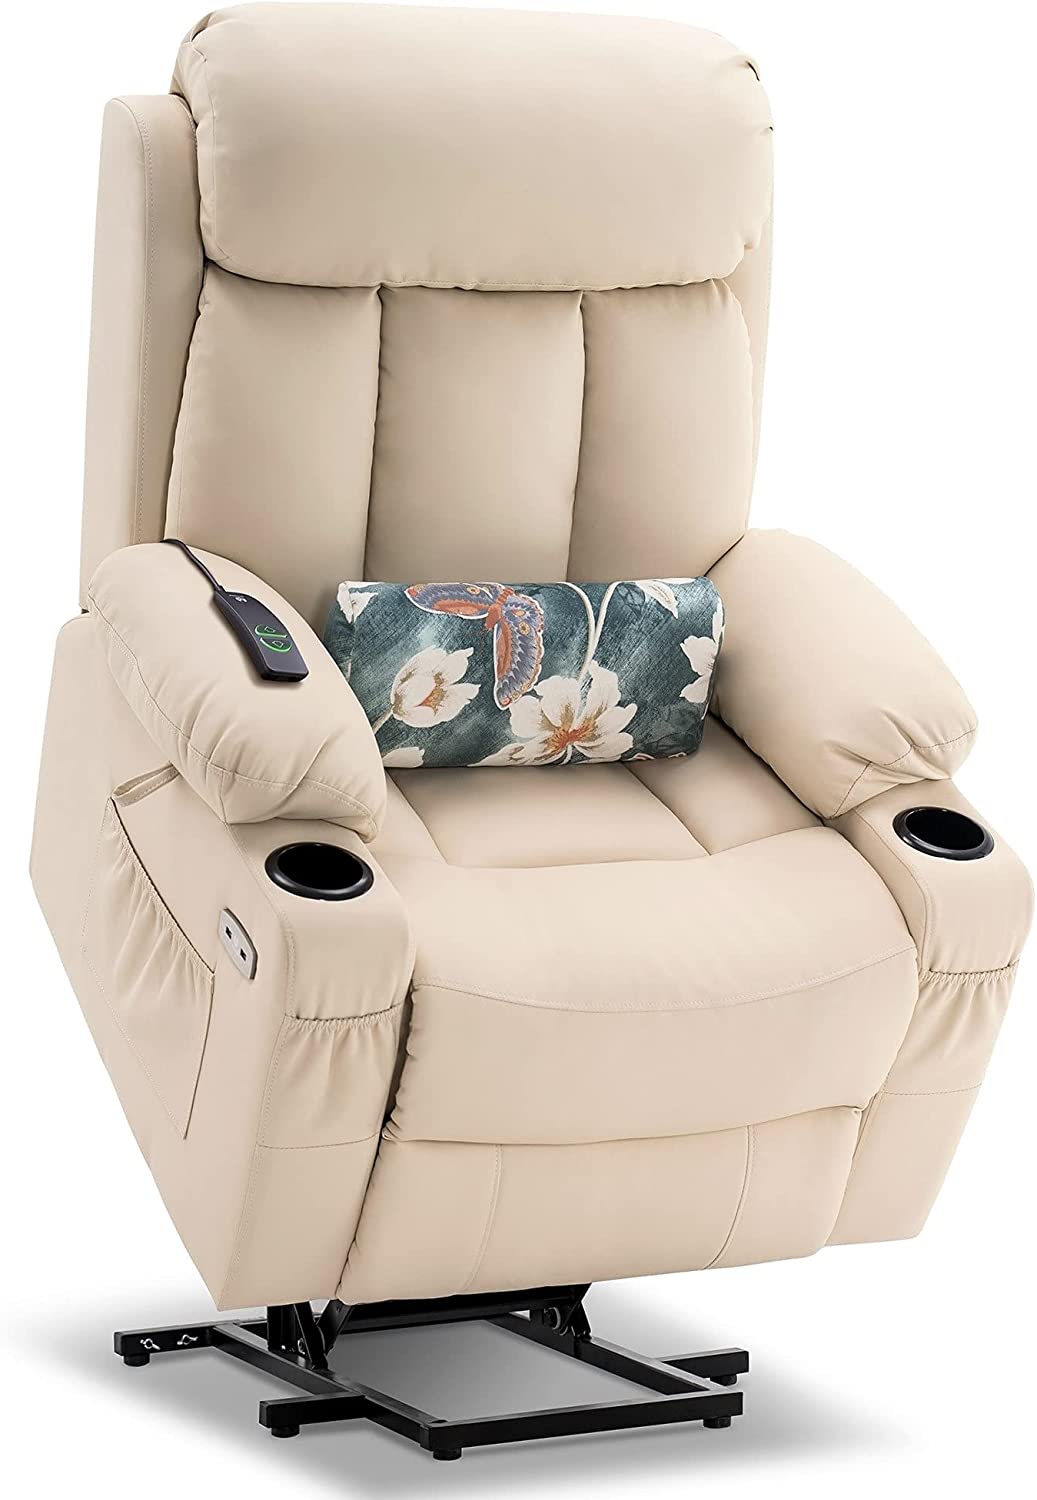 CREAM-WHITE Reclining Lift Chair - Mcombo - Wasatch Medical Supply